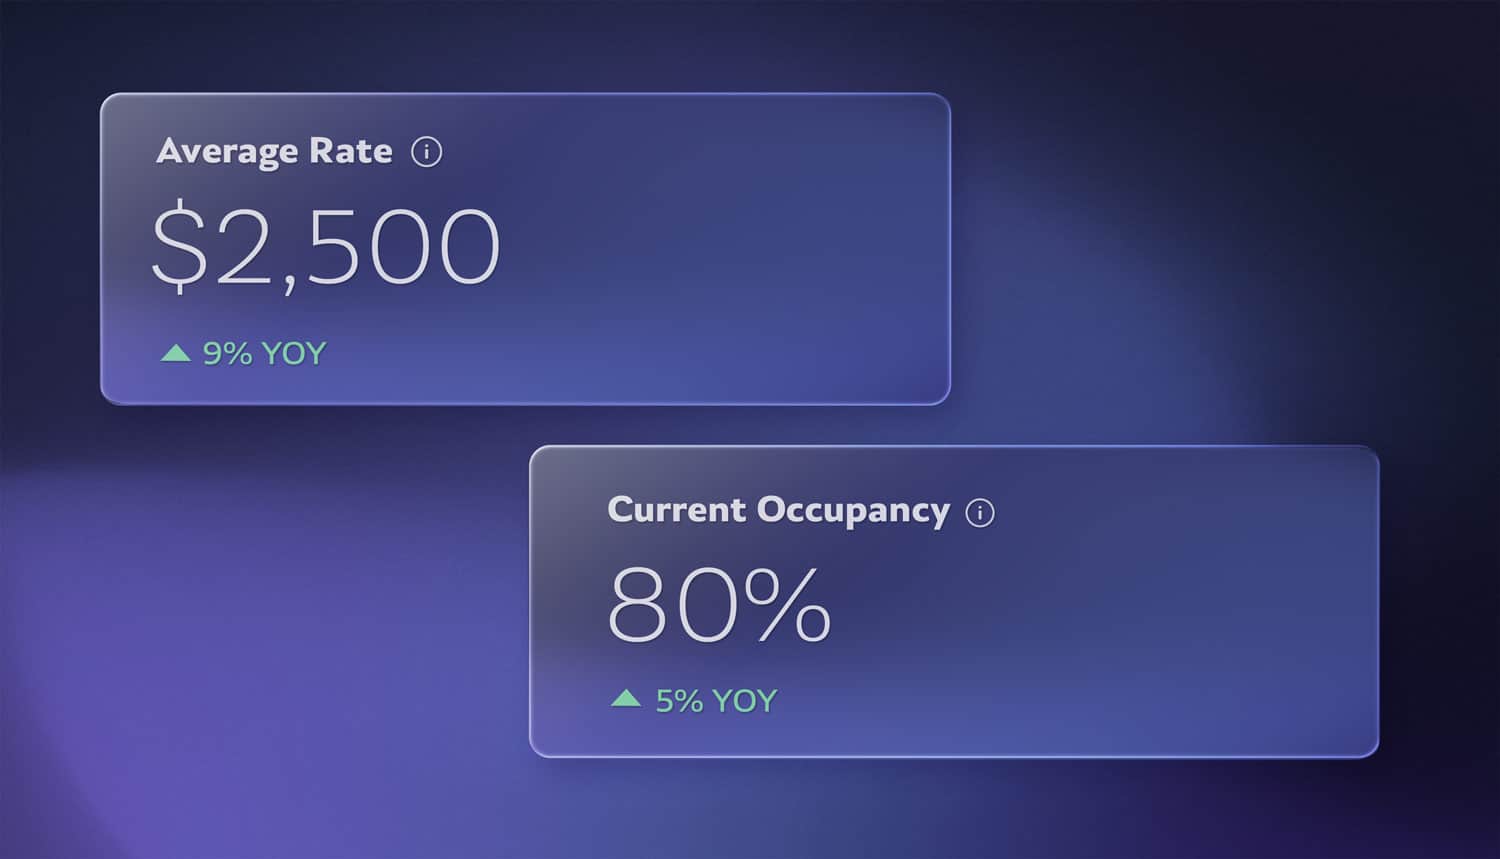 Average rate and current occupancy for seniors housing data analytics